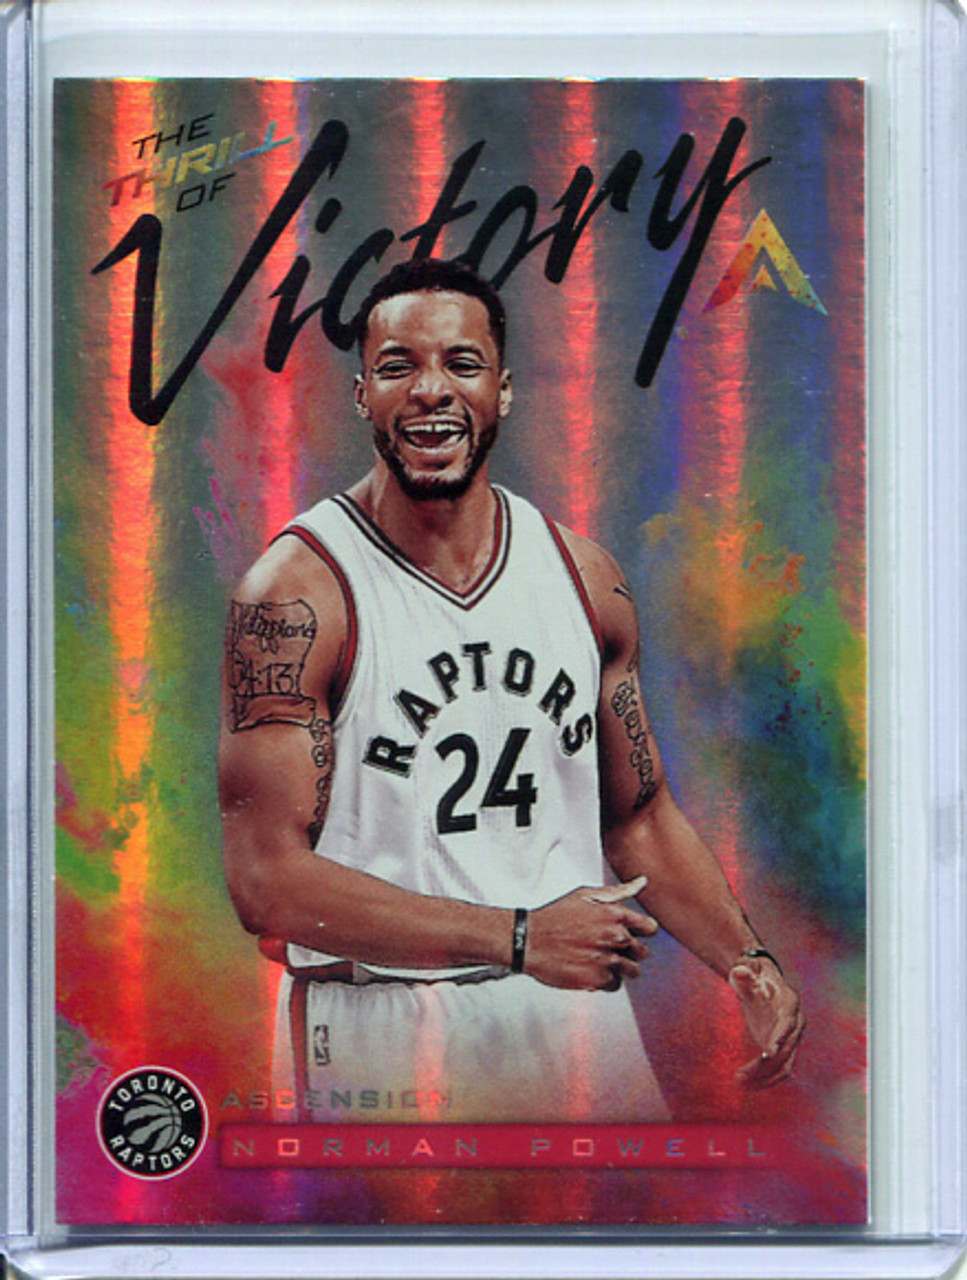 Norman Powell 2017-18 Ascension, The Thrill of Victory #TOV10